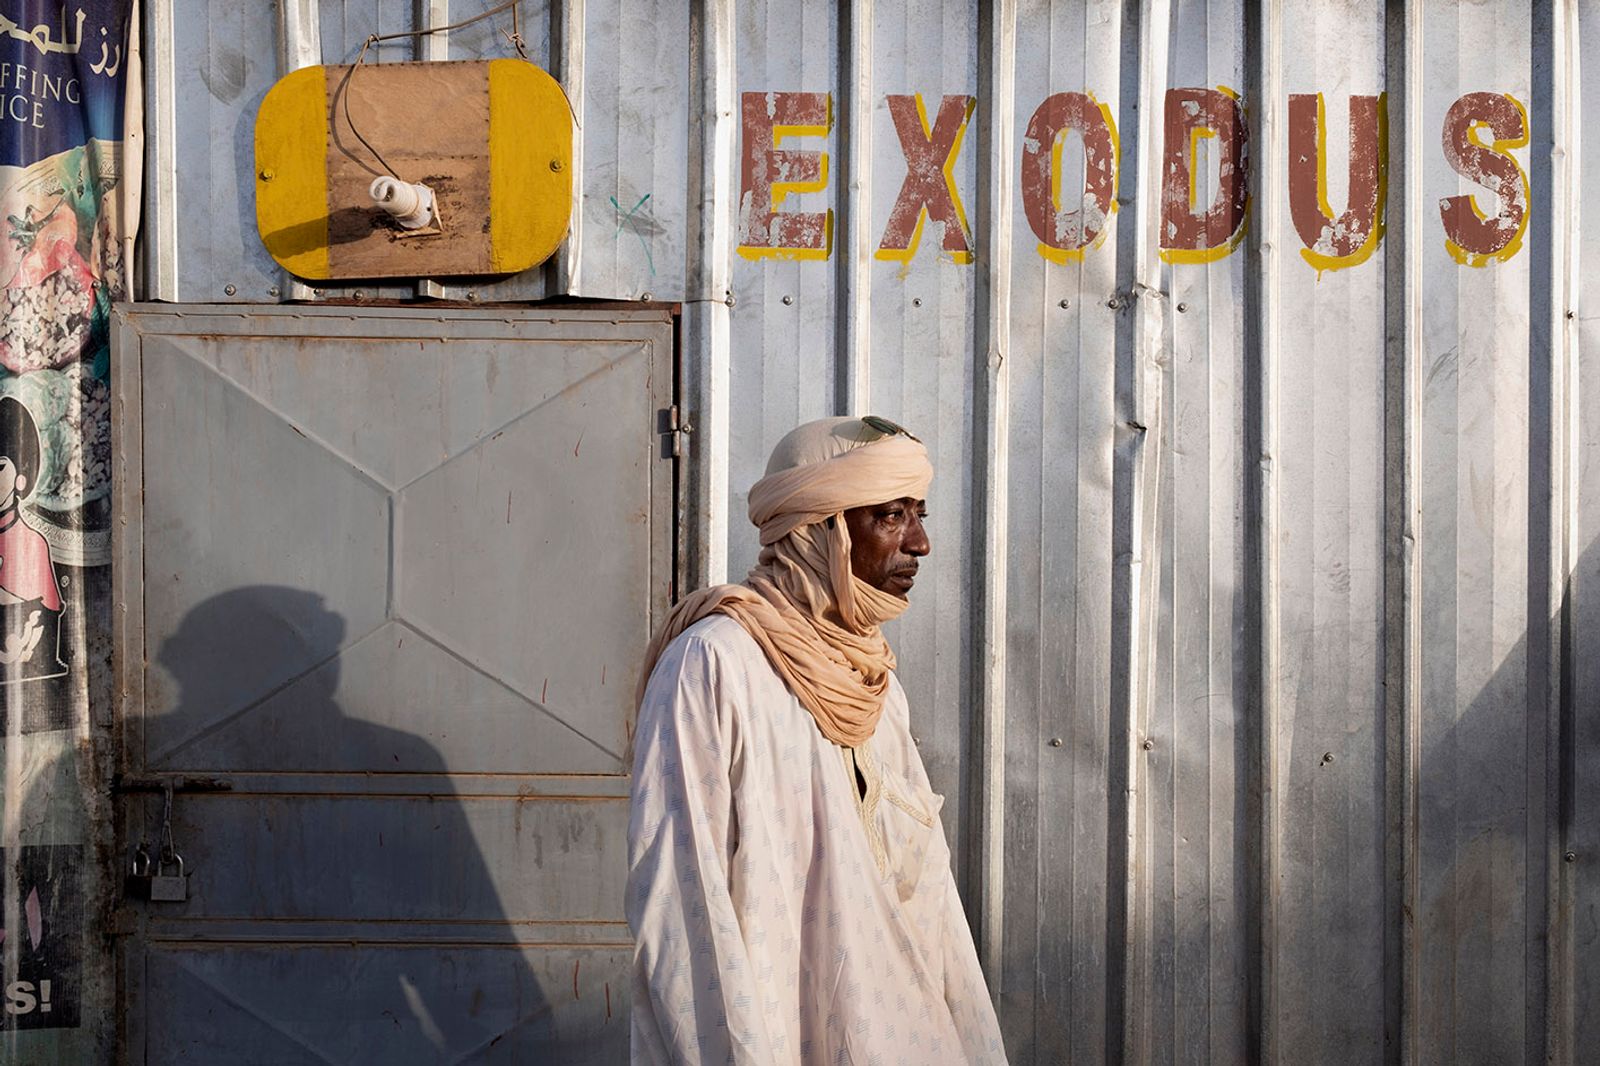 © Francesco Bellina - Image from the Last stop Agadez photography project